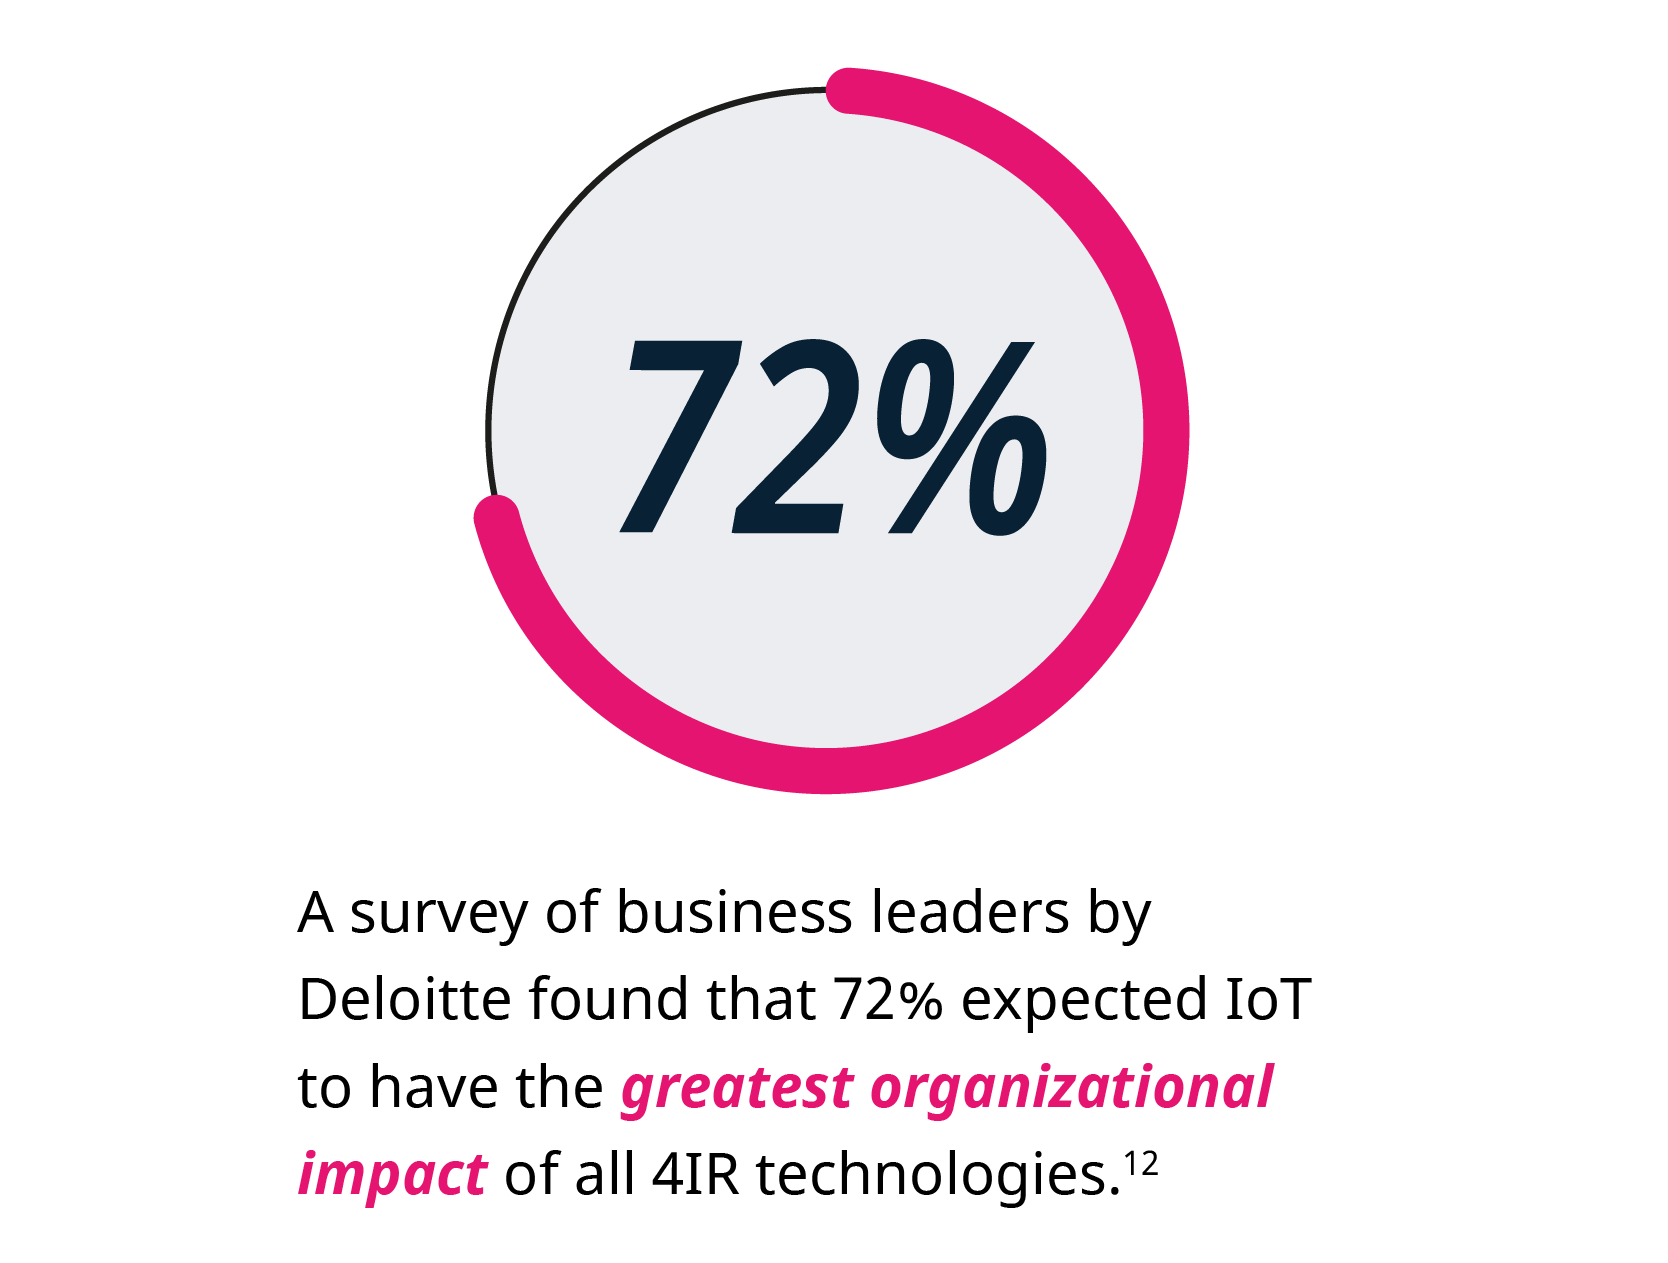 A survey of business leaders by Deloitte found that 72% expected IoT to have the greatest organizational impact of all 4IR technologies.